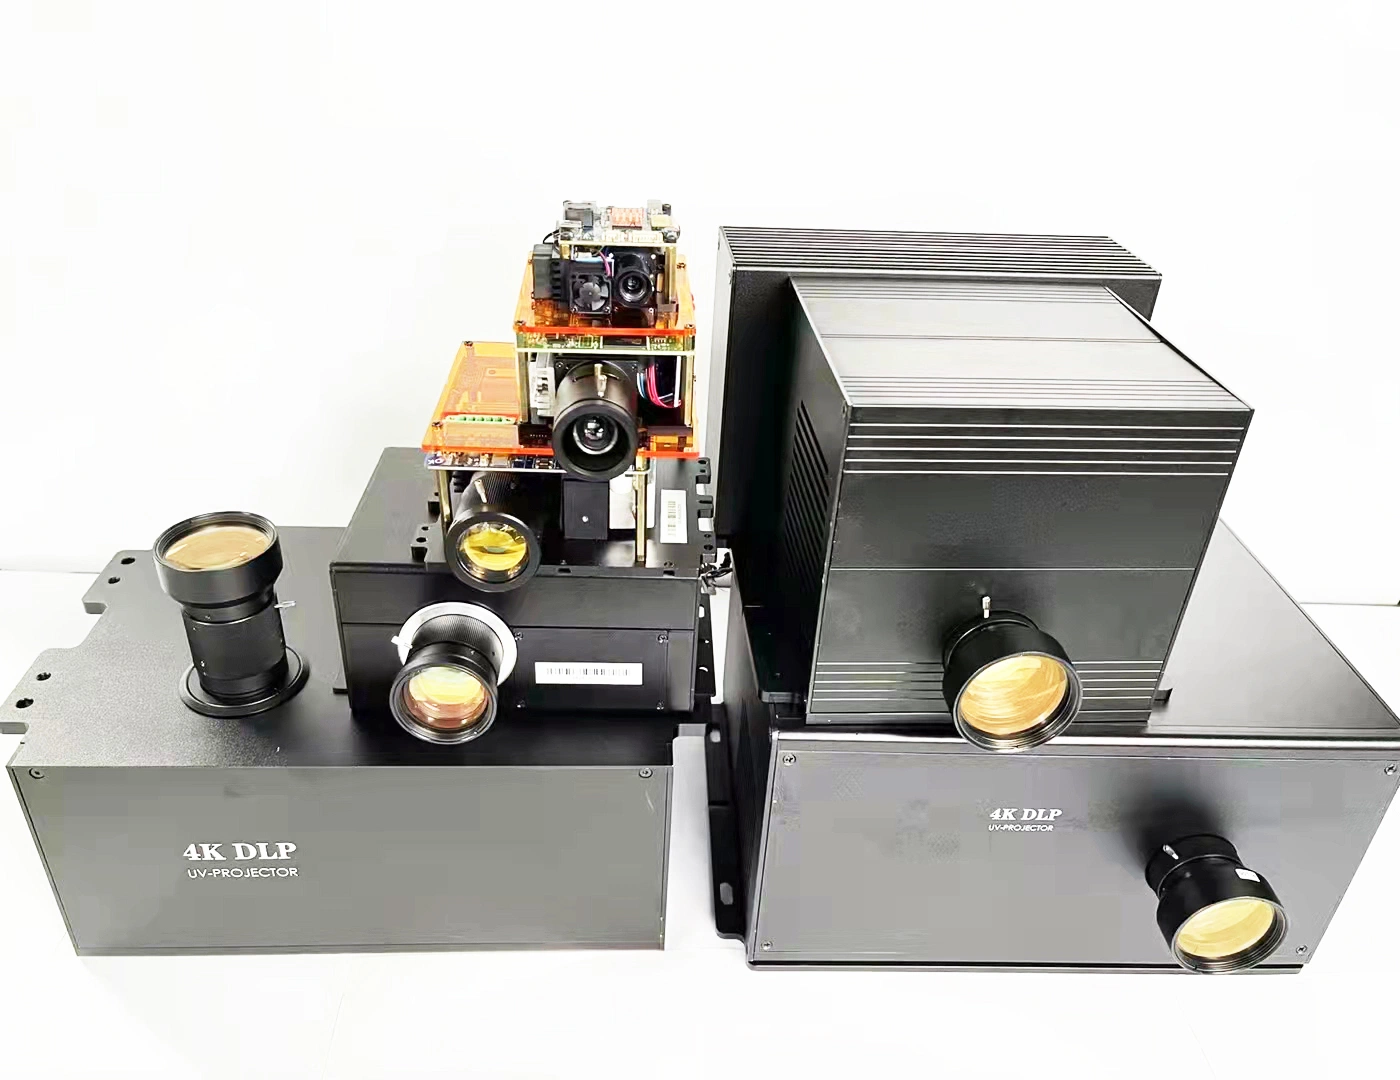 High-Speed and High-Precision Zs DLP Optical Engine Is a Flagship Product Tailored for High-Speed Exposure Digital Lithography, Using Ti DLP9000 High-Speed Chip